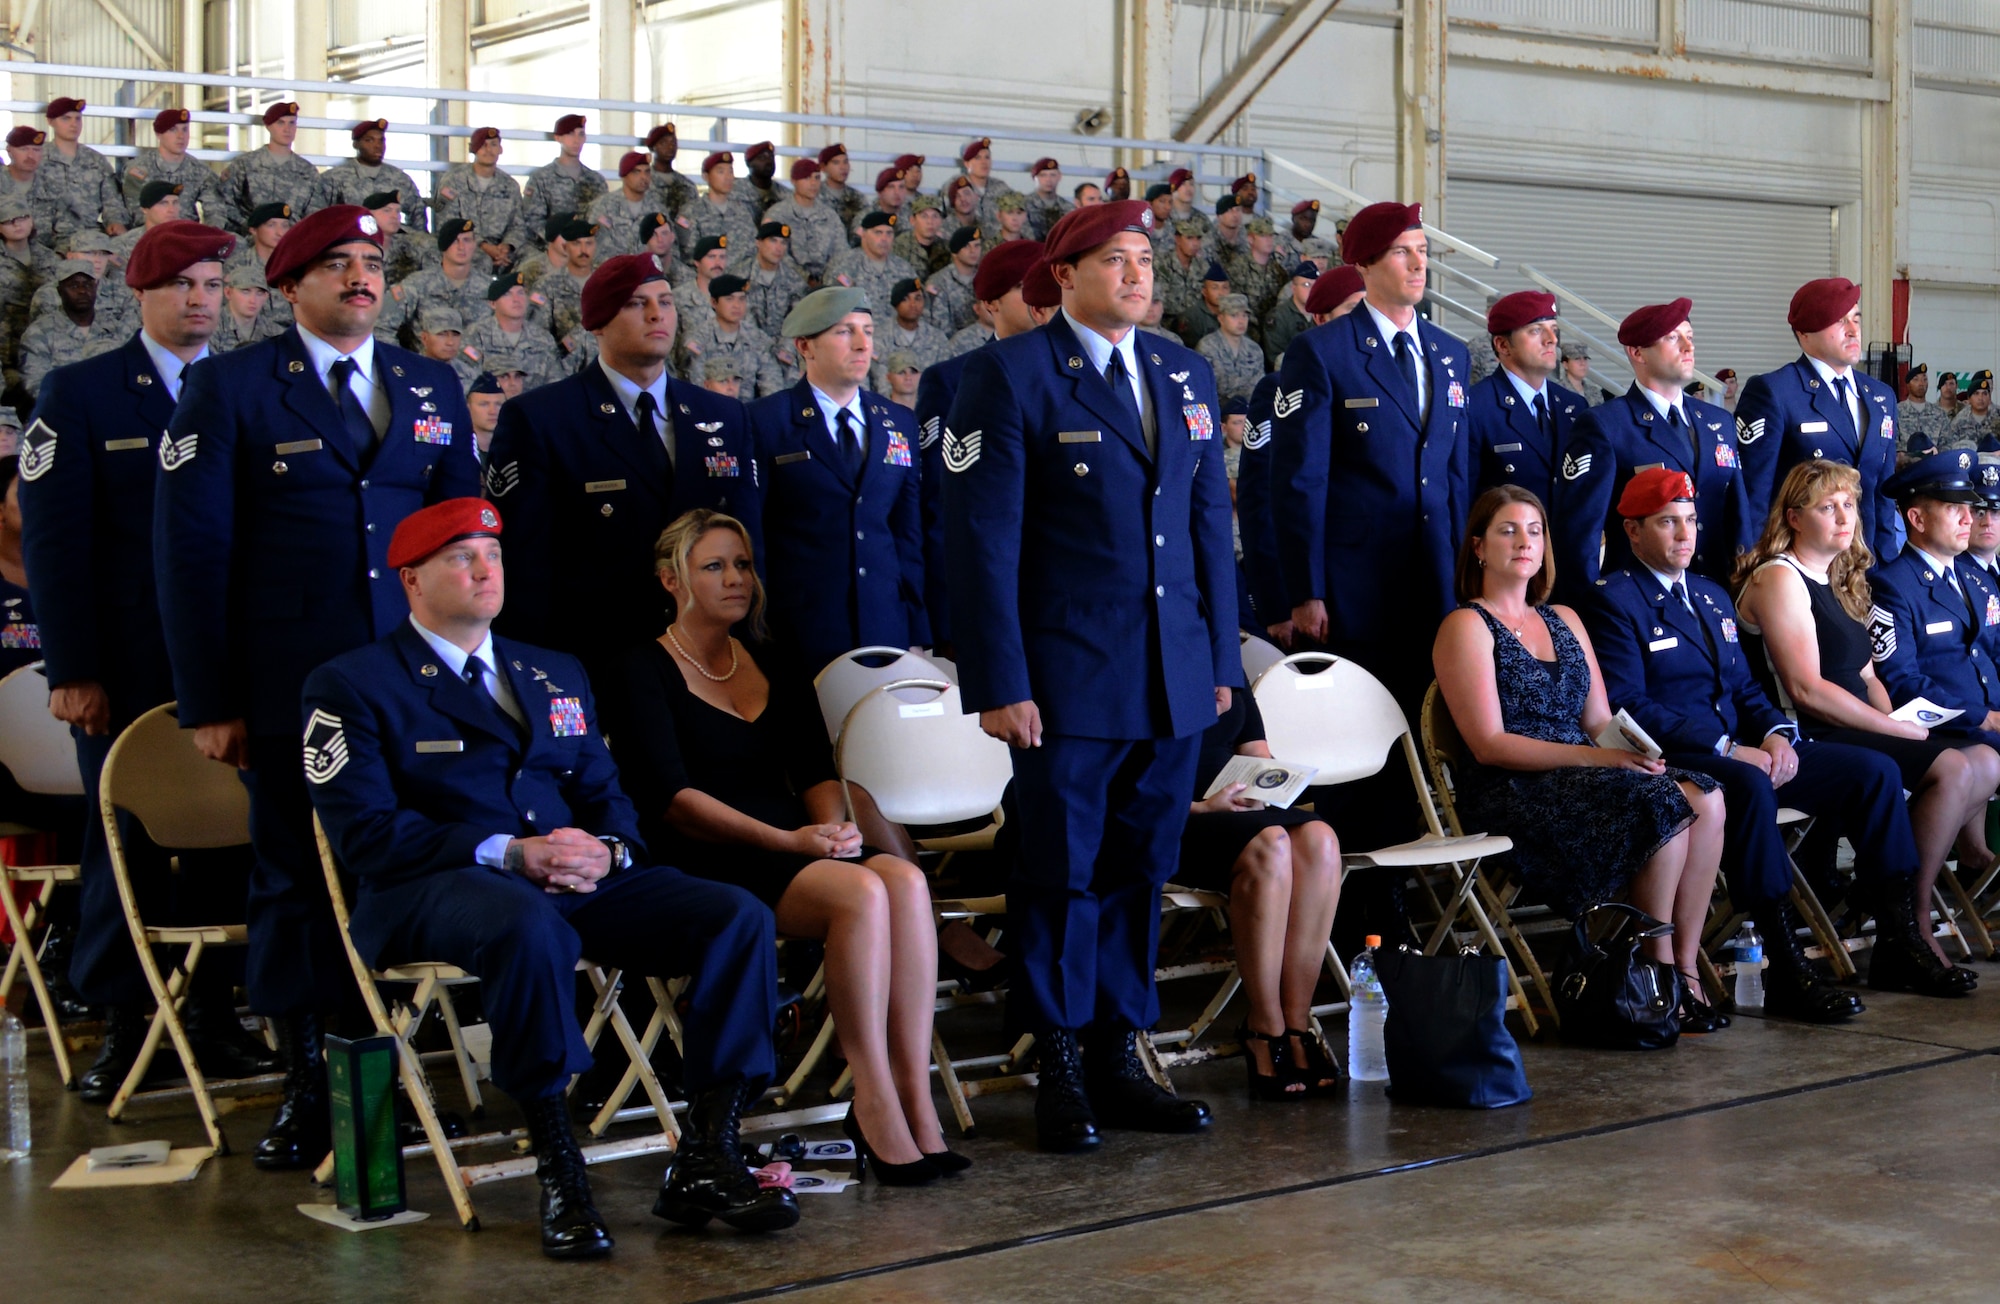 Members from Tech. Sgt. Barton’s team stand during roll call held during a memorial service held for Barton Nov. 25, 2014 at Kadena Air Base, Japan. Barton, a 320th Special Tactics Squadron pararescueman, died Oct. 30 from injuries sustained after a rappelling incident during a joint exercise training event near Kathmandu, Nepal.  (U.S. Air Force photo by Tech. Sgt. Kristine Dreyer)
 
